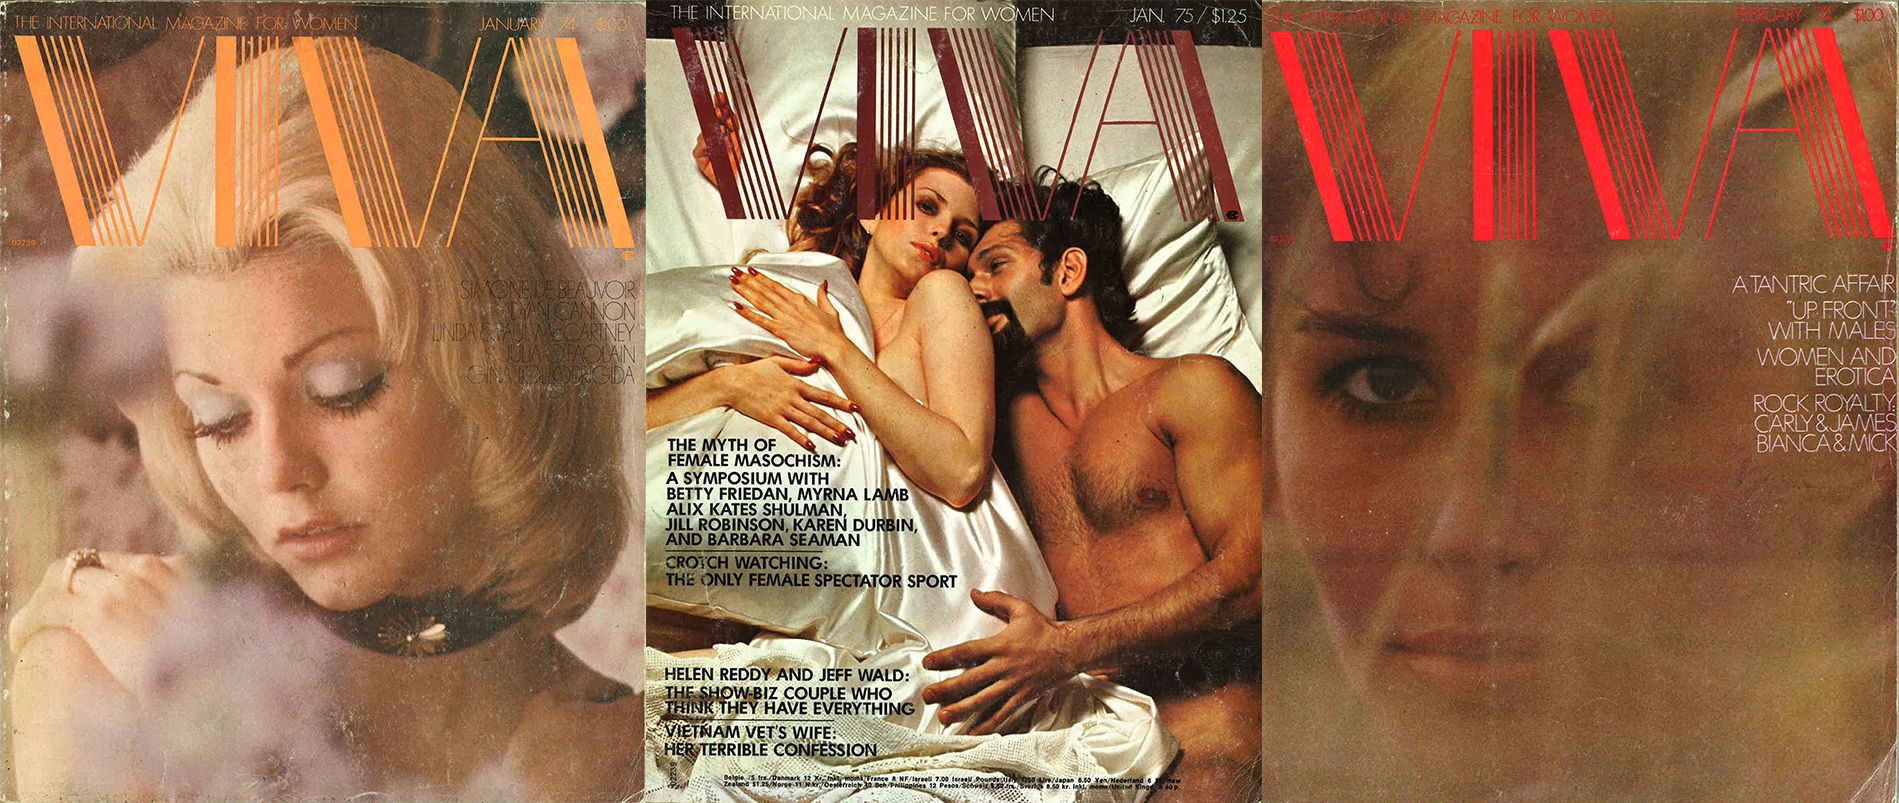 1899px x 803px - An Oral History of Viva, the '70s Porn Magazine for Women